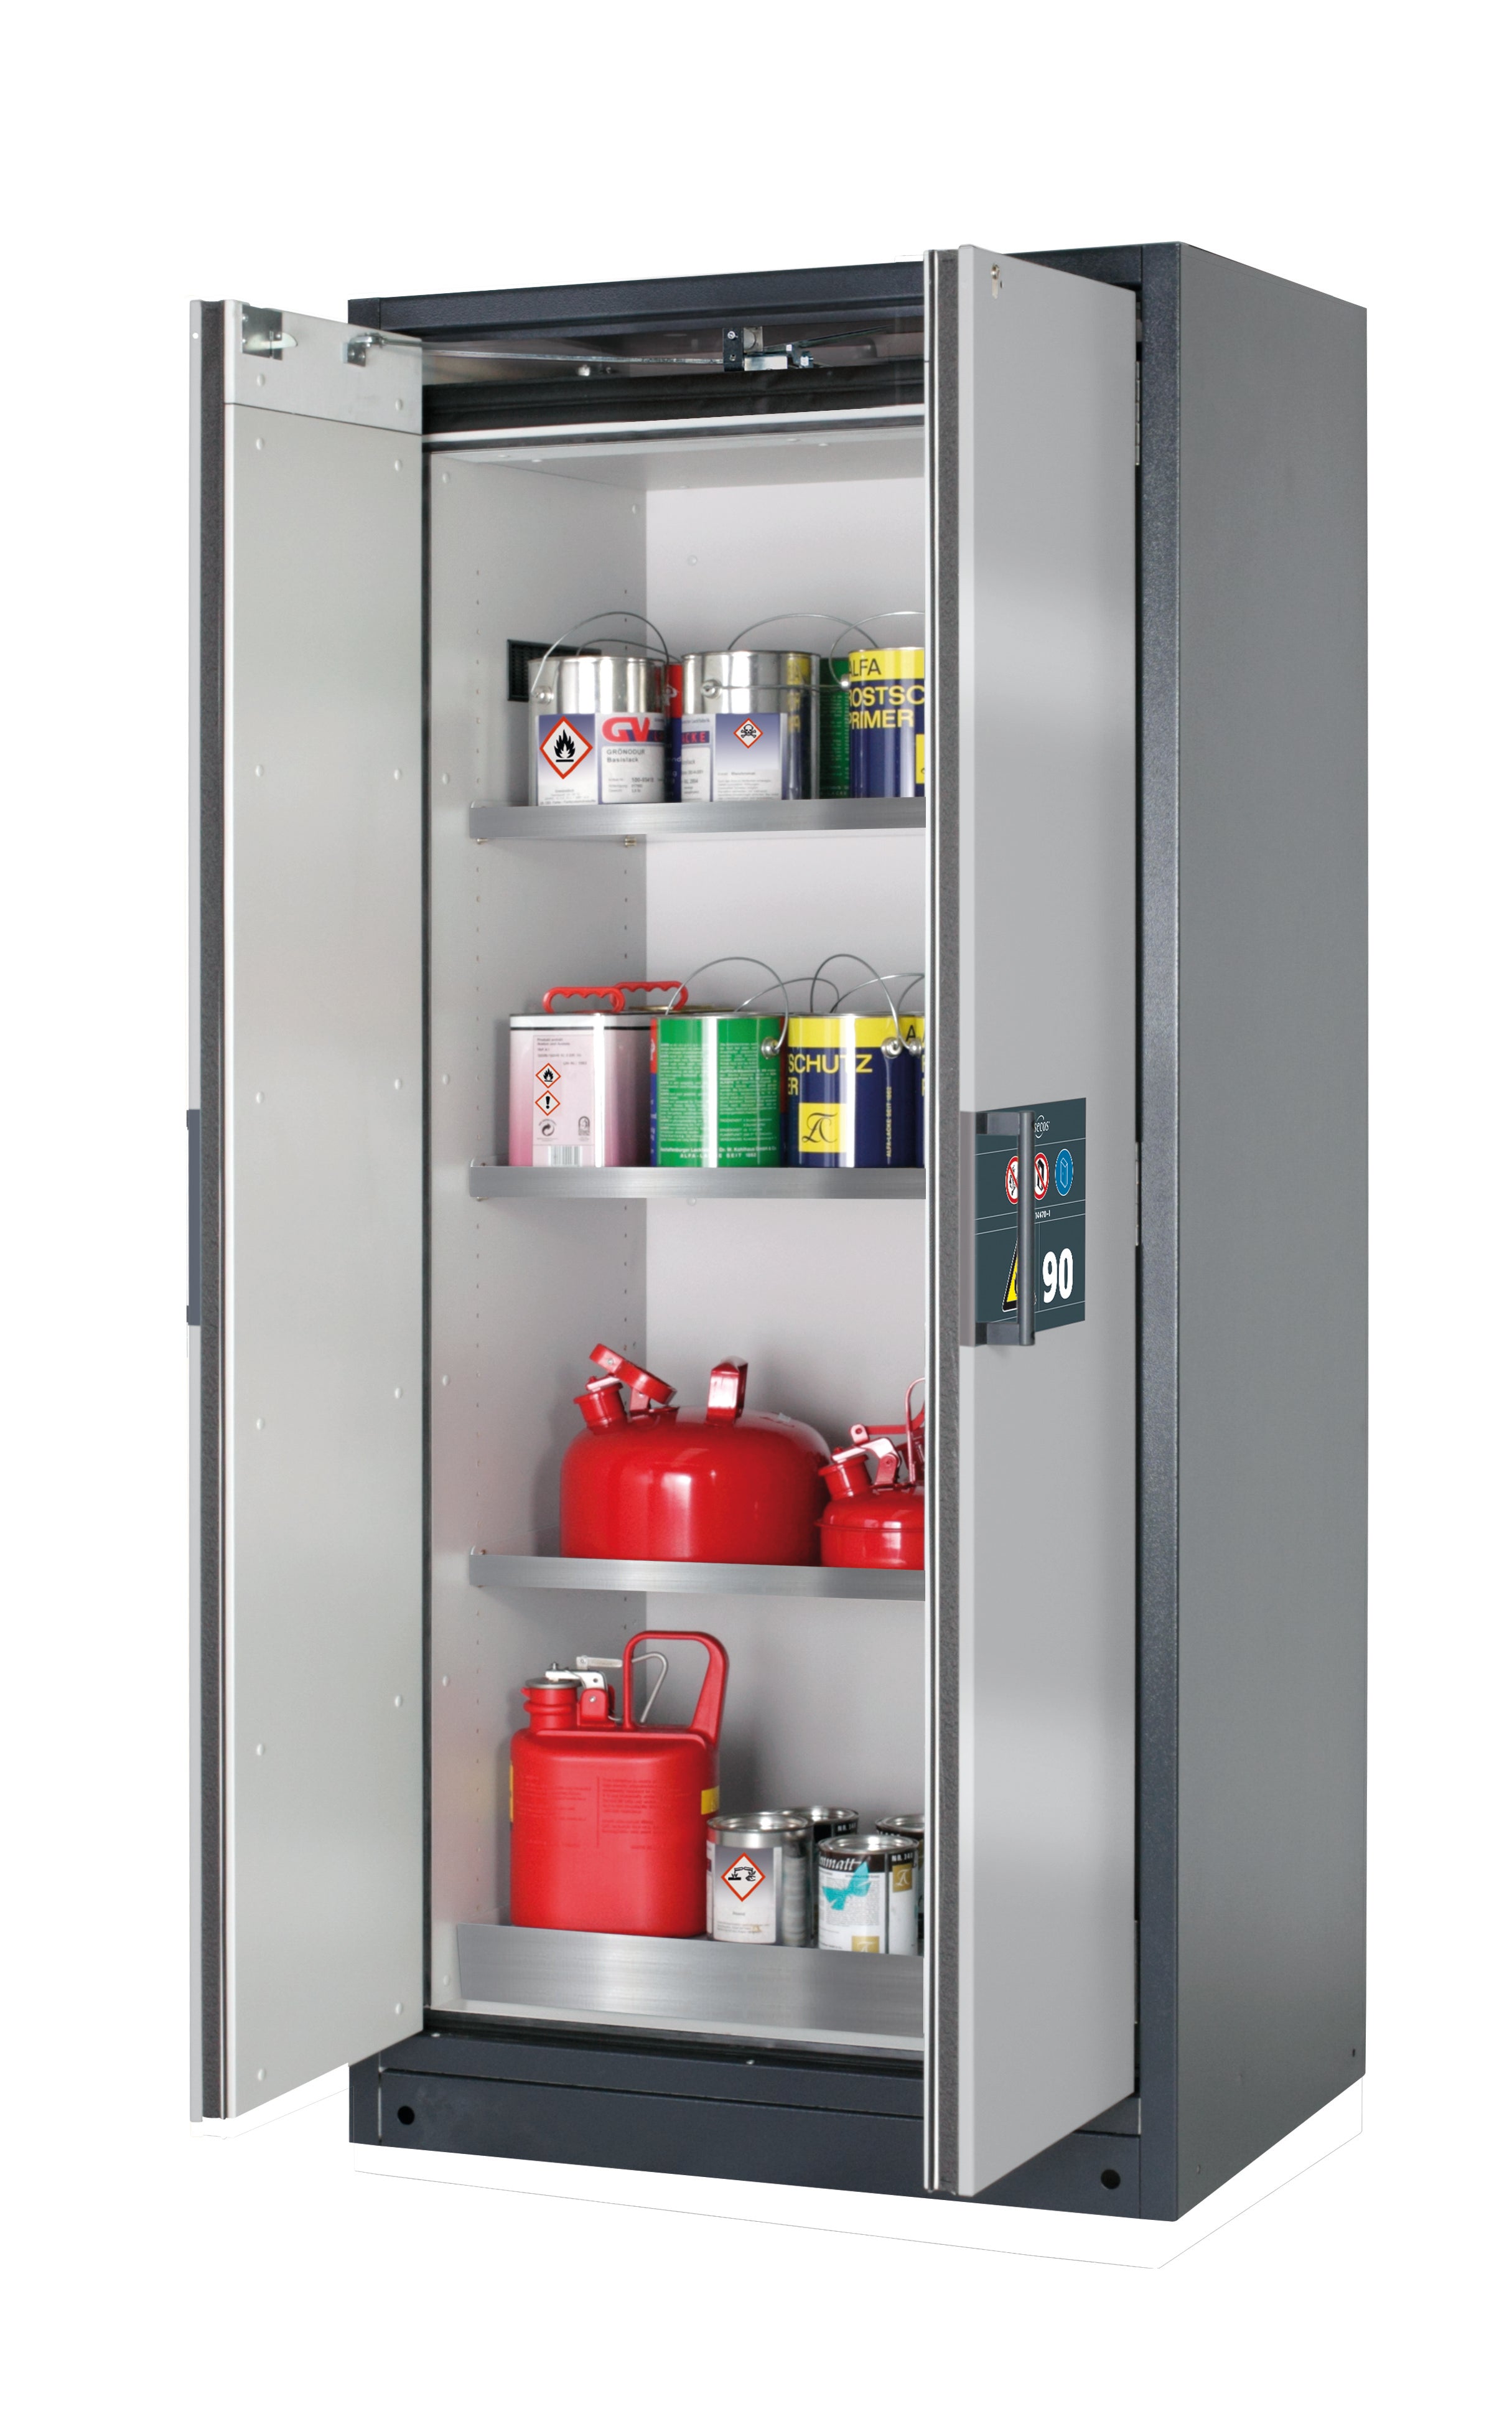 Type 90 safety storage cabinet Q-PEGASUS-90 model Q90.195.090.WDAC in asecos silver with 3x shelf standard (stainless steel 1.4301),